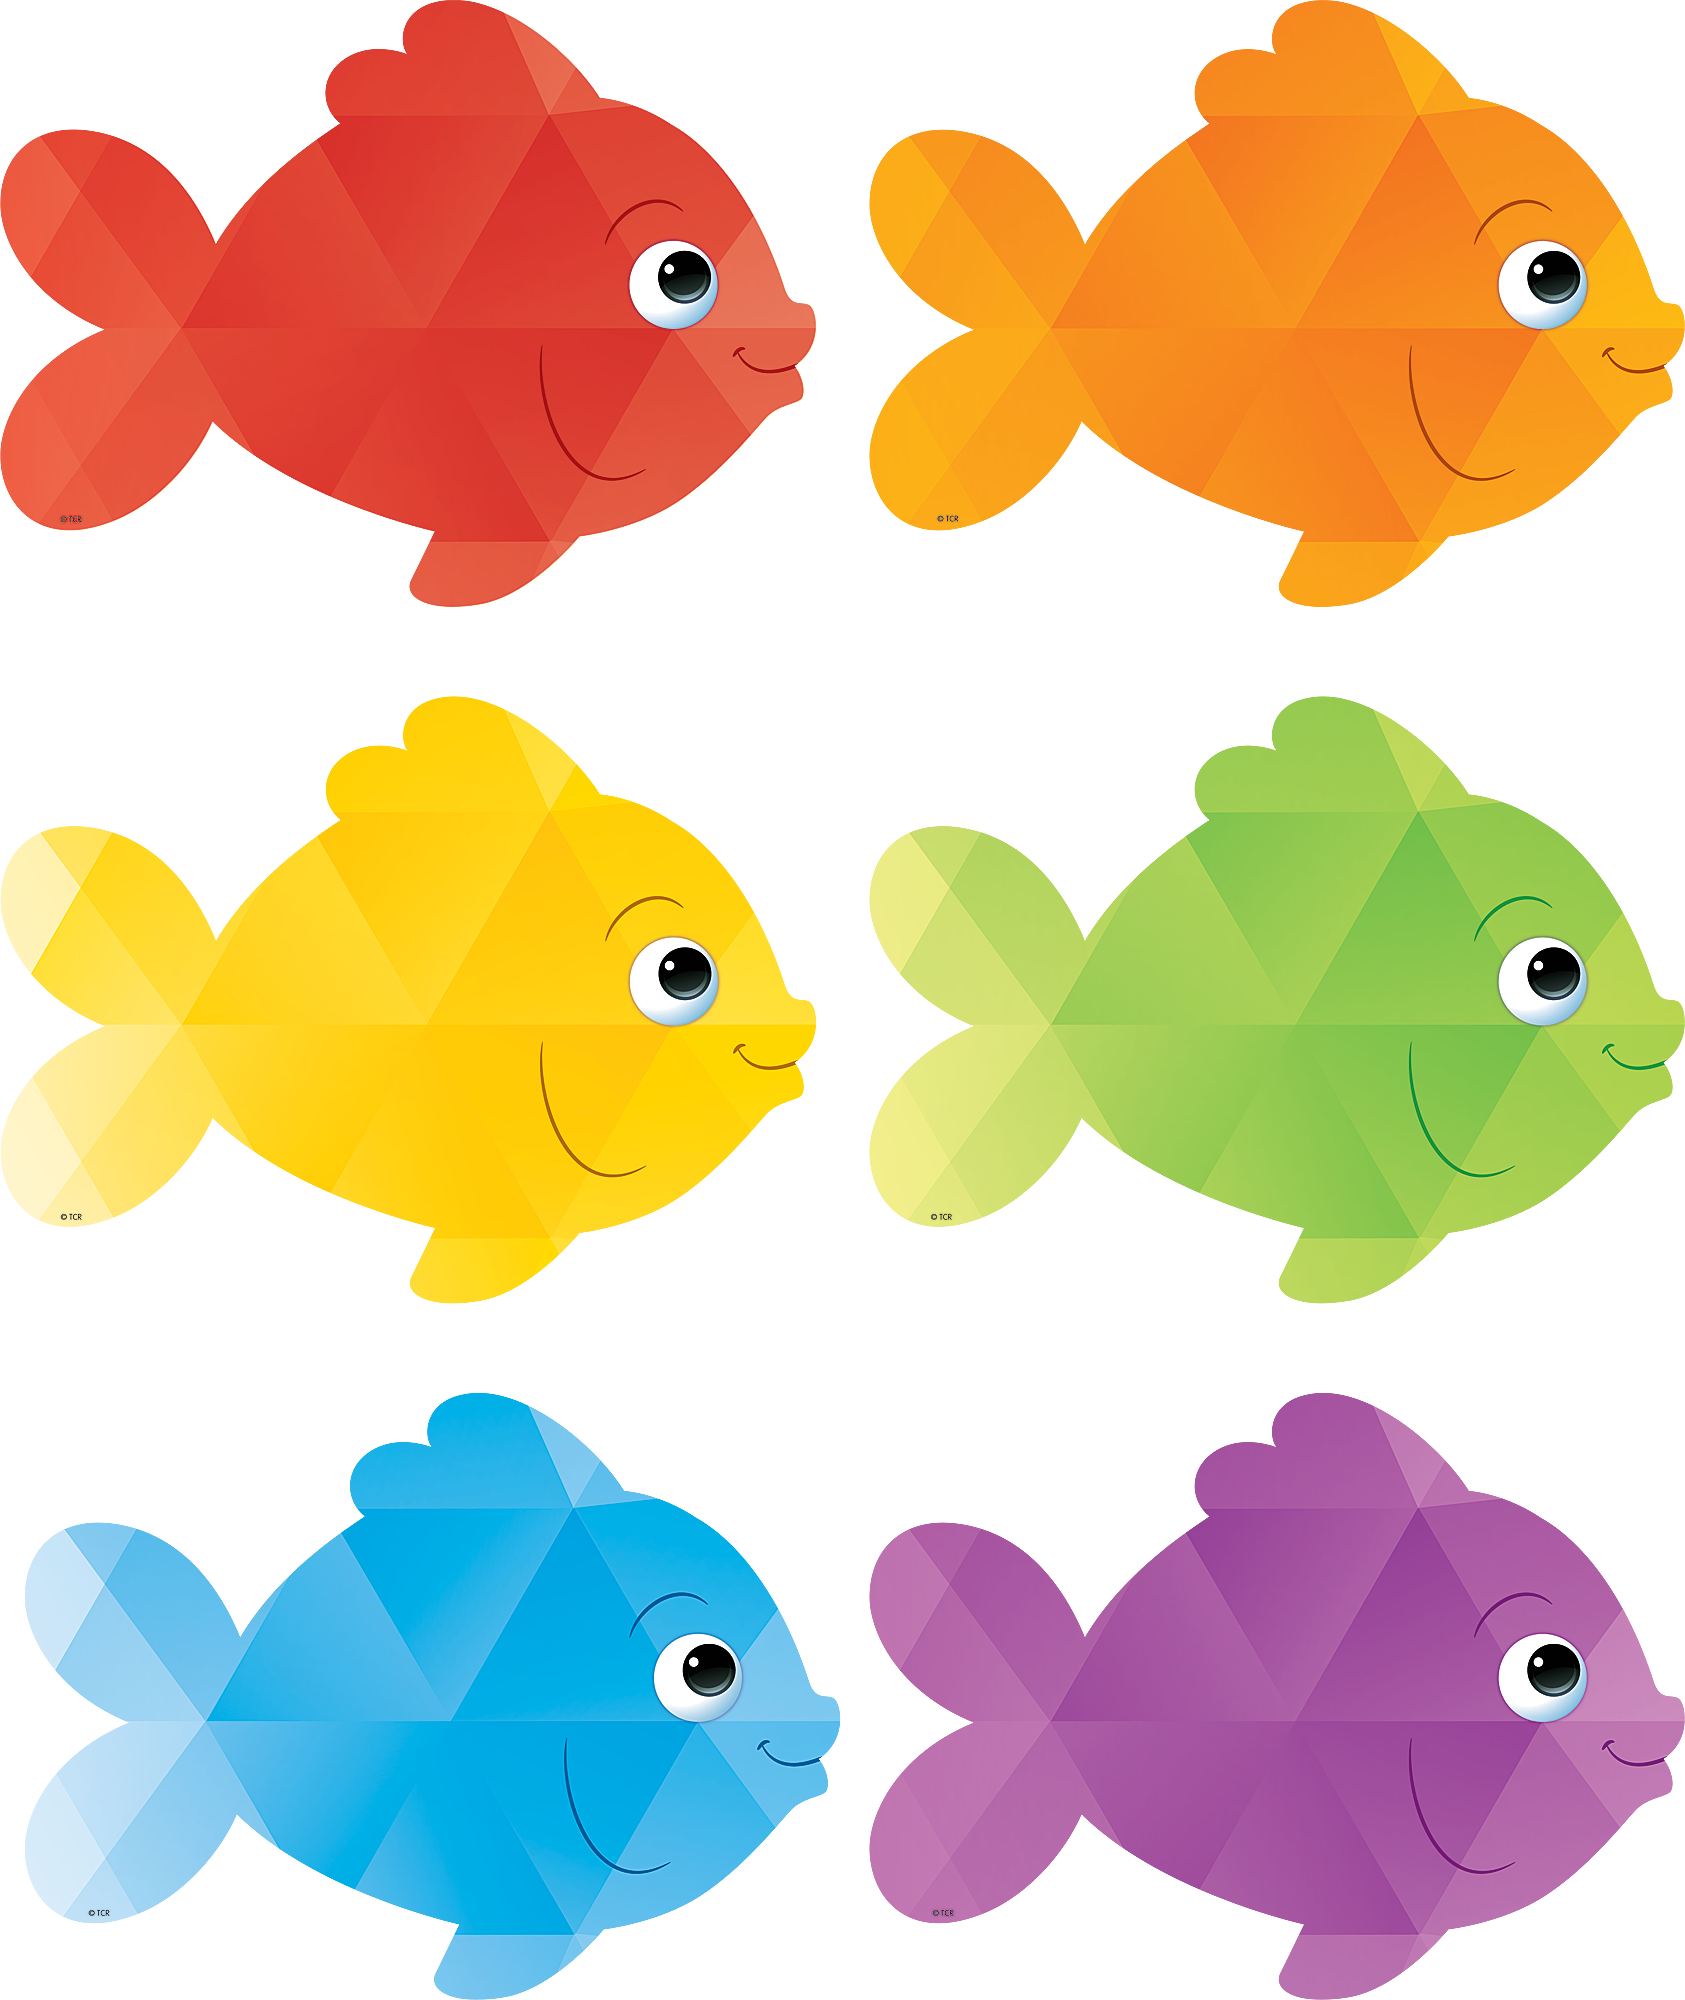 Colorful Fish Accents